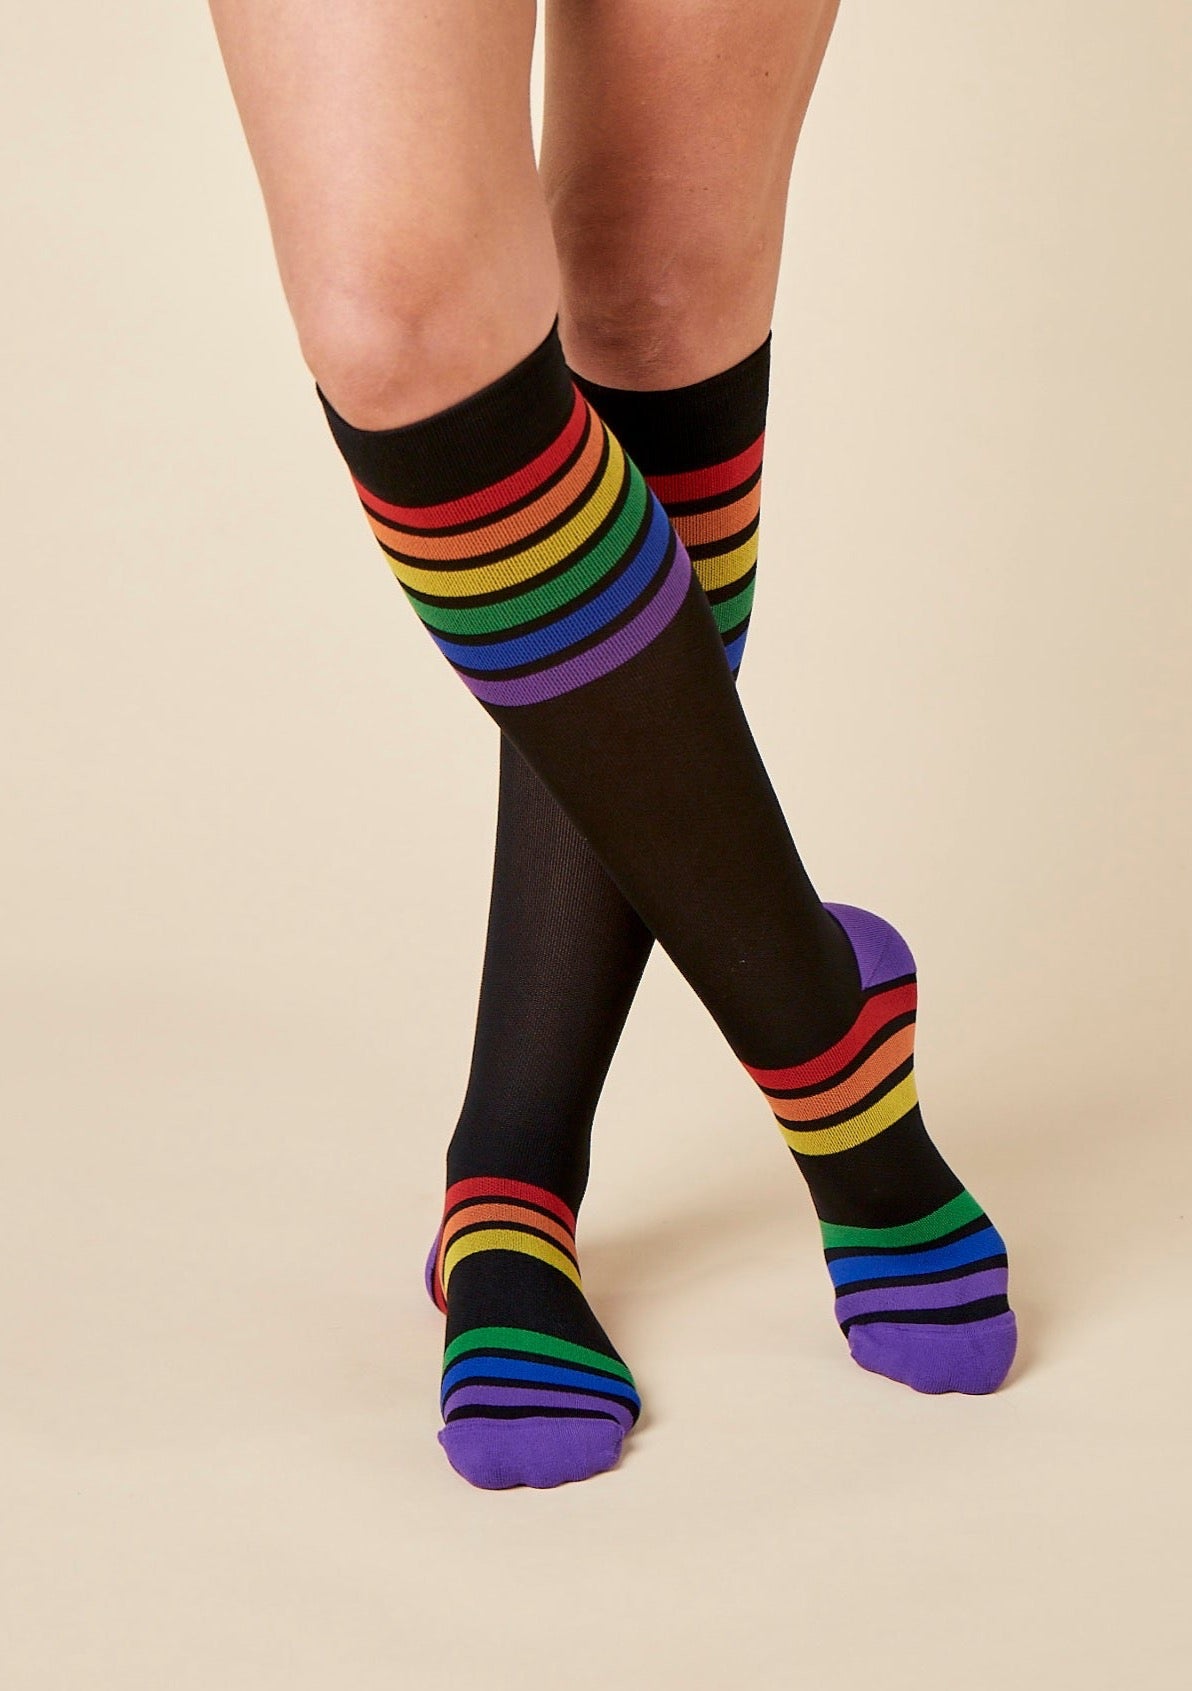 TheRY Graduated compression black rainbow pride socks 15-20mmHg for travel, swollen feet, cankles and hospital - front view